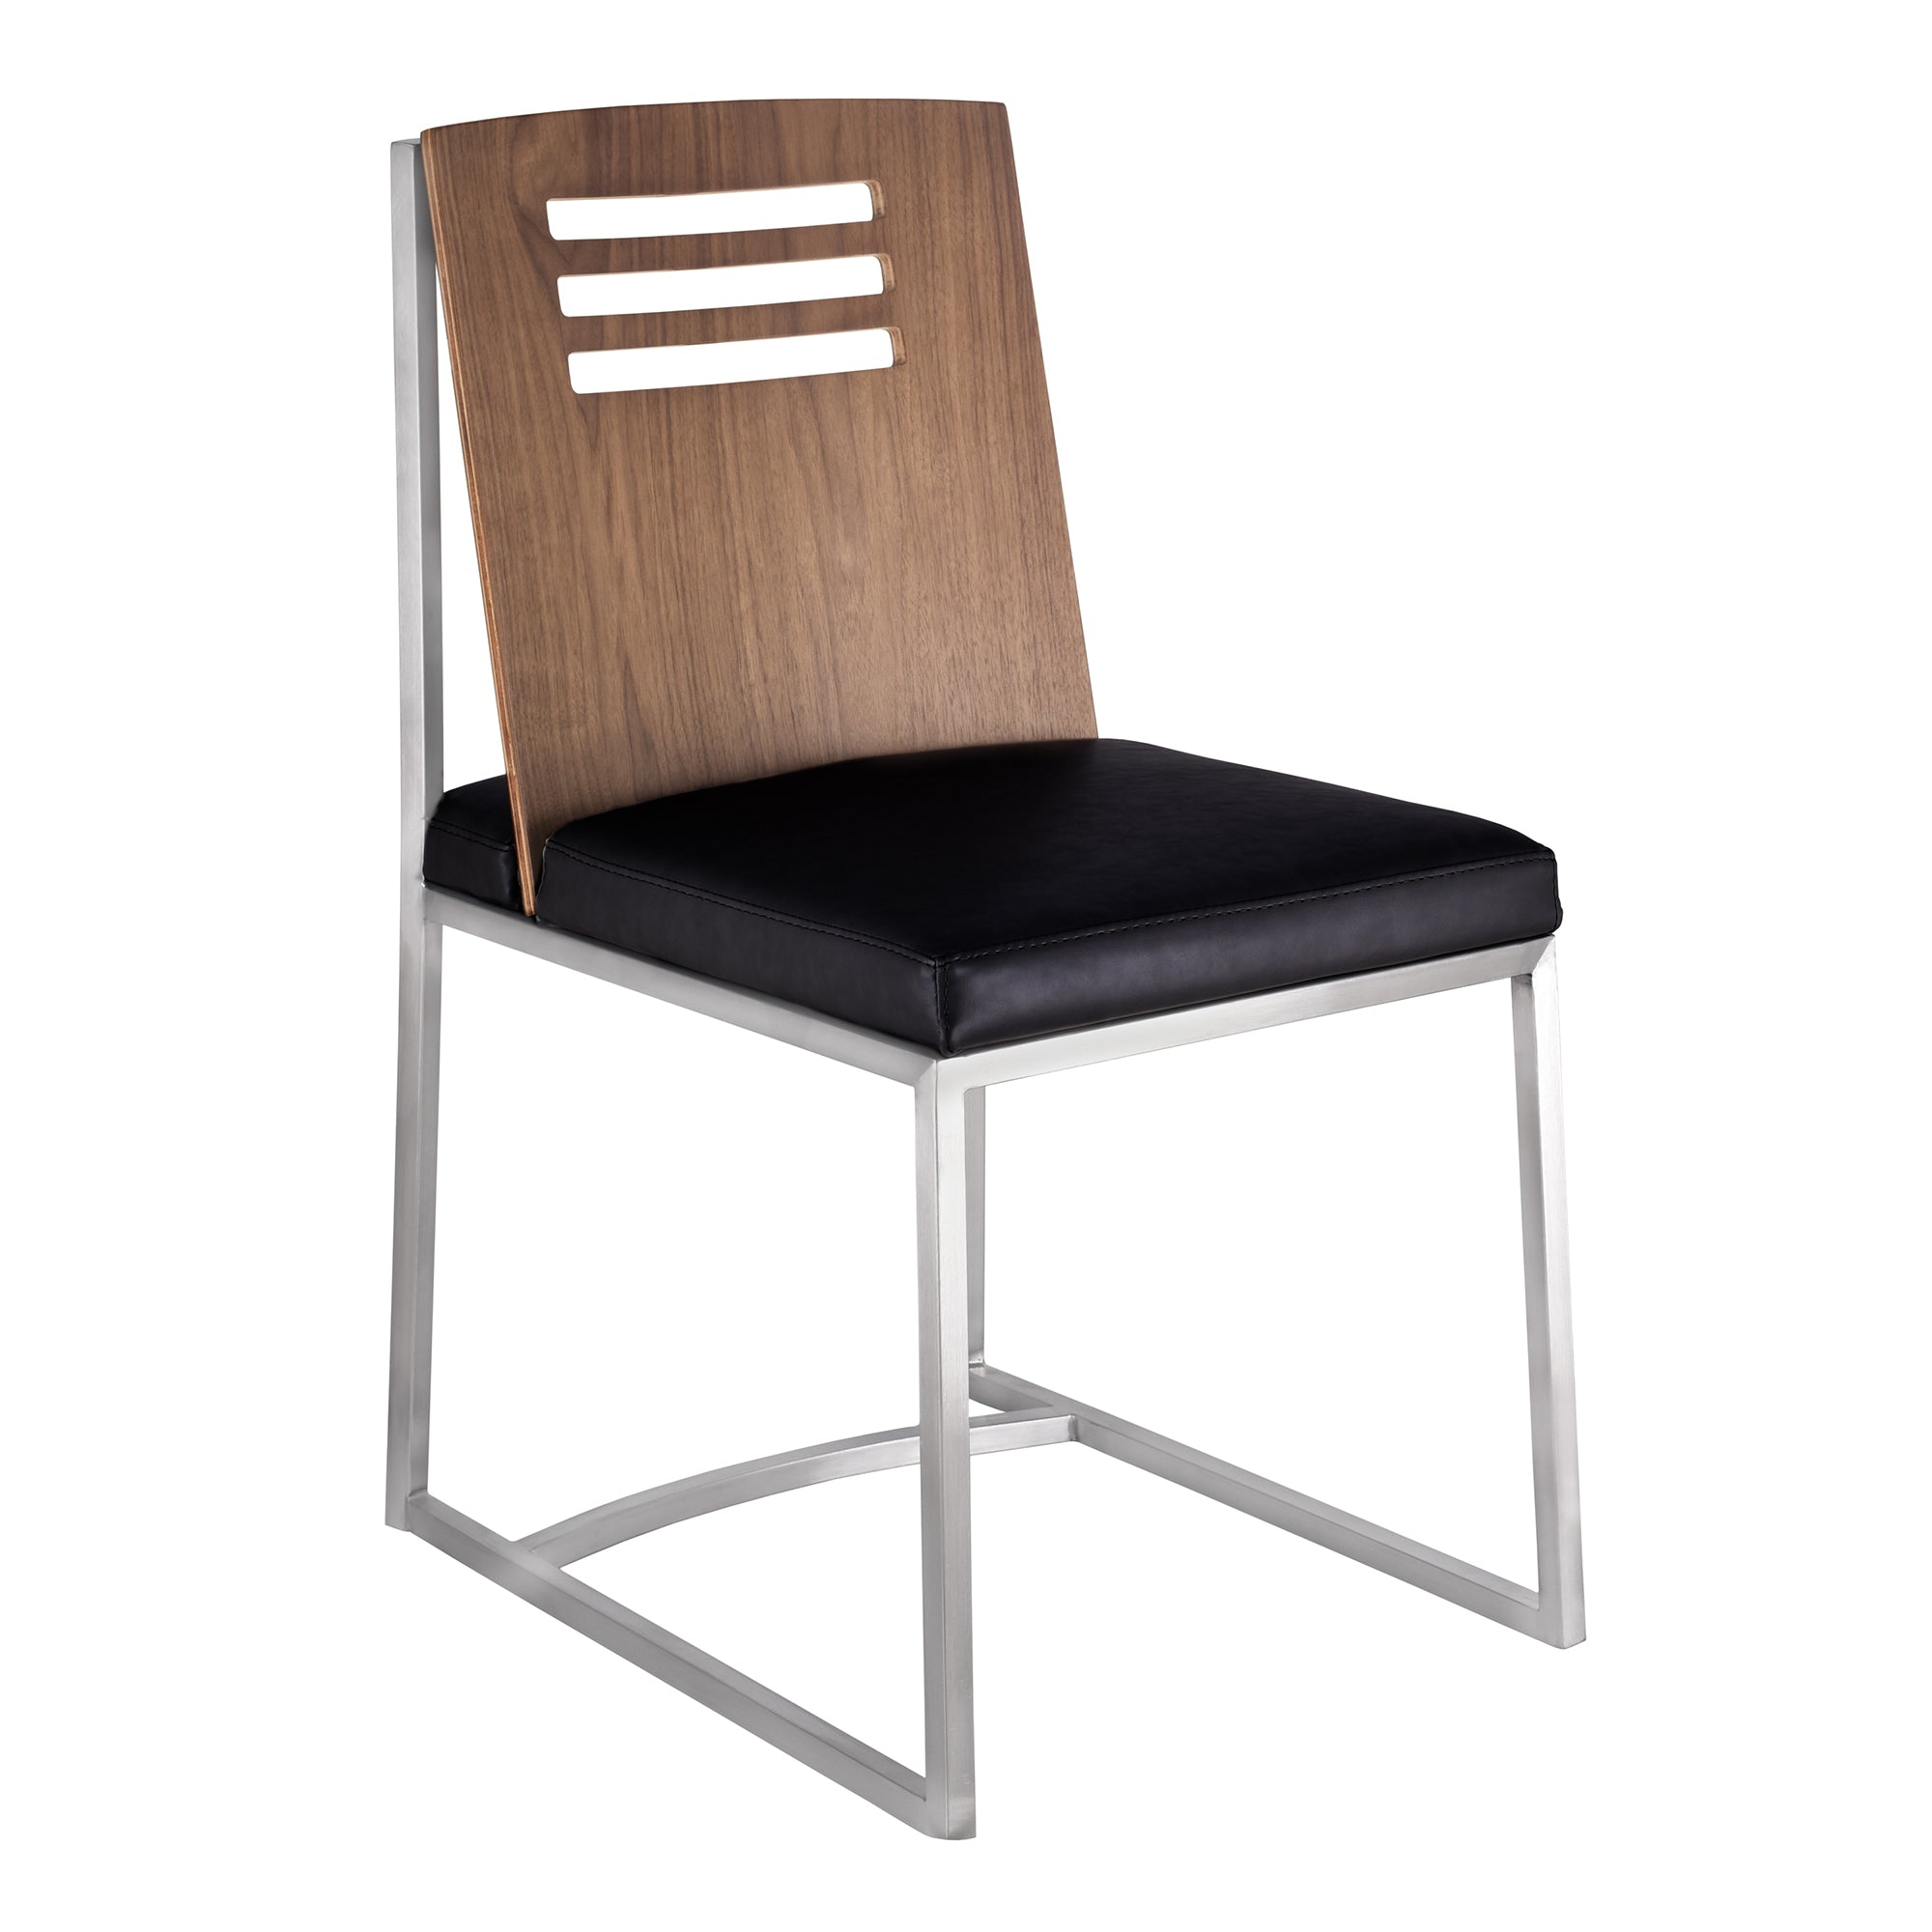 Armen Living Lcoxsivbbs Oxford Dining Chair In Brushed Stainless Steel With Vintage Black Faux Leather And Walnut Wood Back